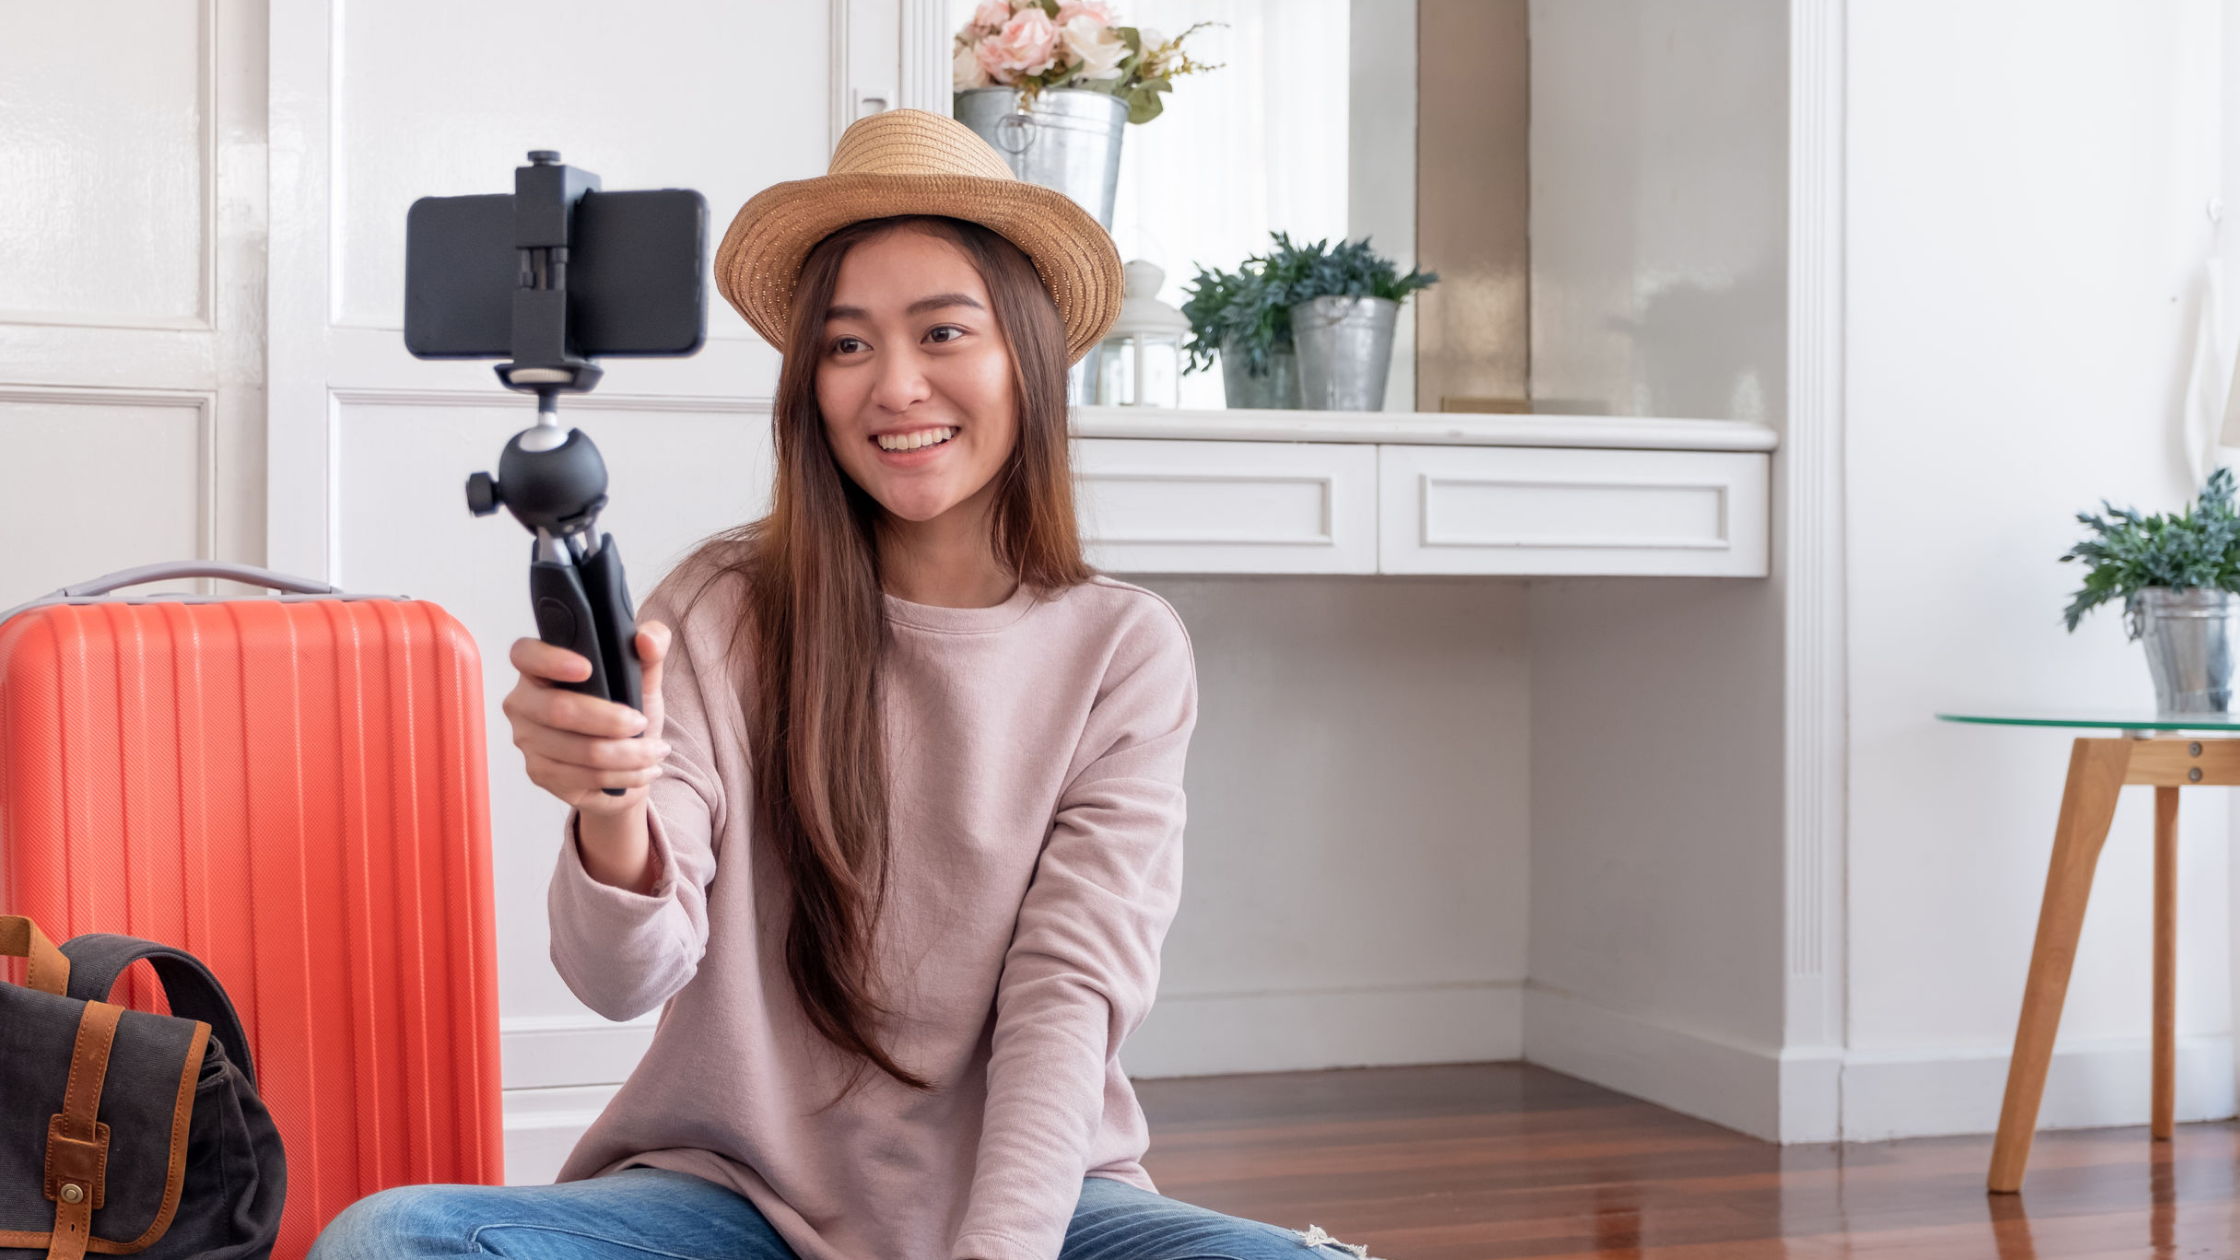 A woman wearing a hat holding a tripod with phone